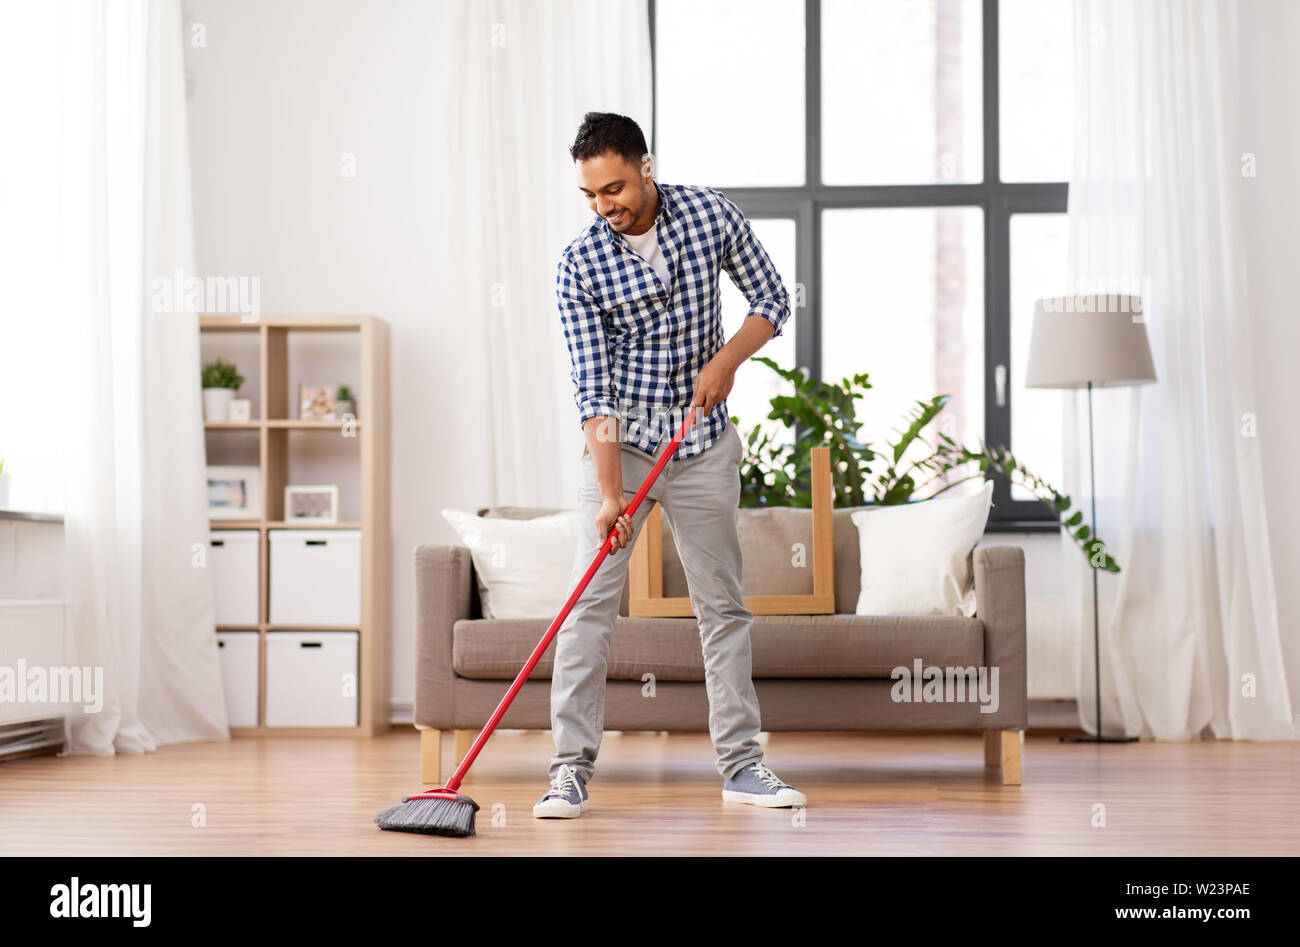 man with broom cleaning floor at home Stock Photo